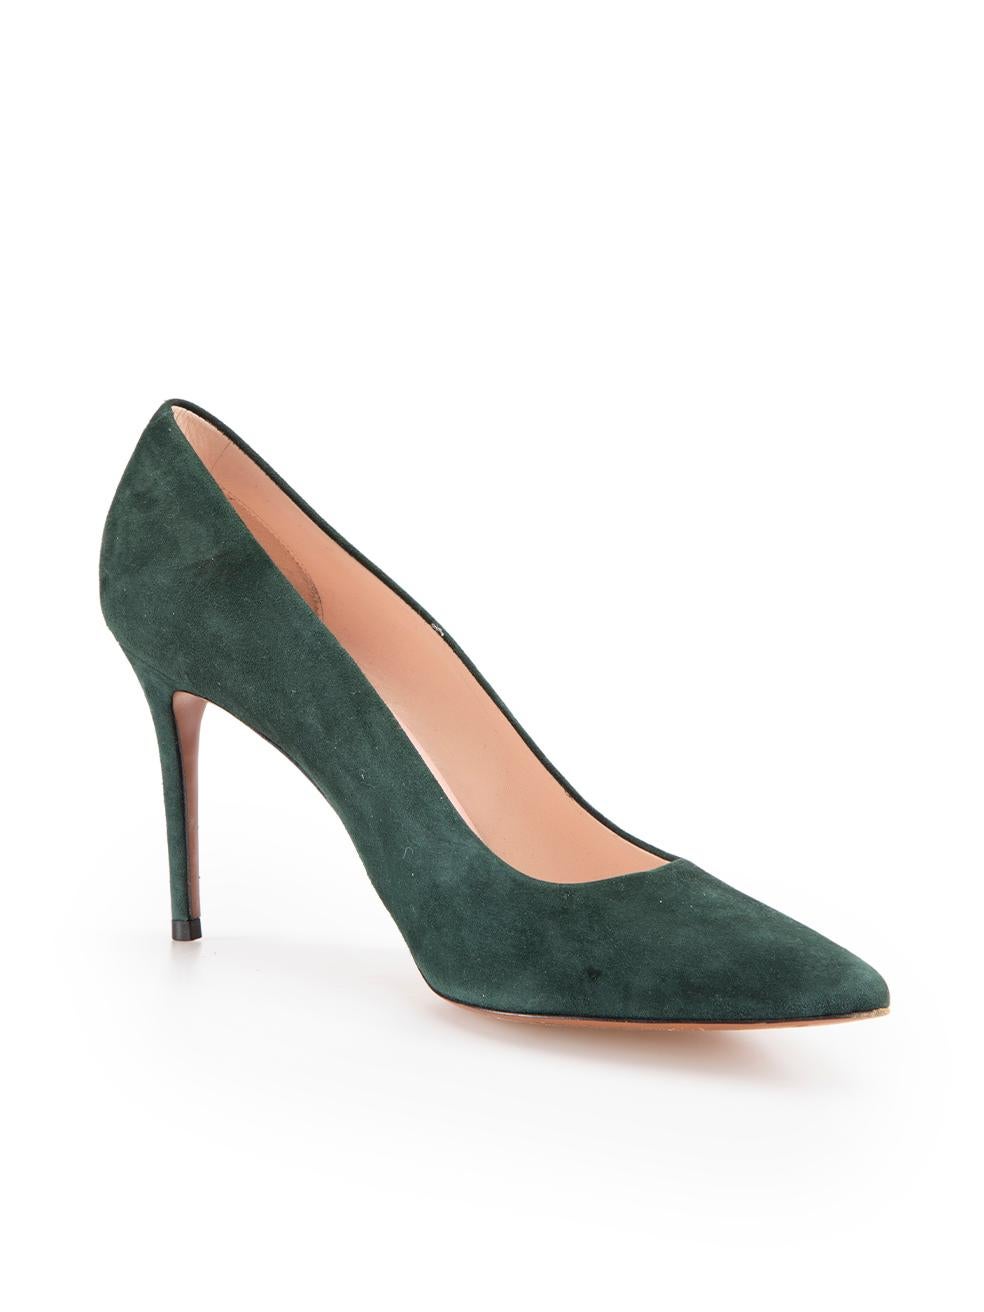 CONDITION is Good. Minor wear to pumps is evident. Light wear to outer sole with minor scuffing on suede on this used Céline designer resale item.



Details


Dark green 

Suede

Slip-on pumps

High heeled

Pointed-toe



 

Made in